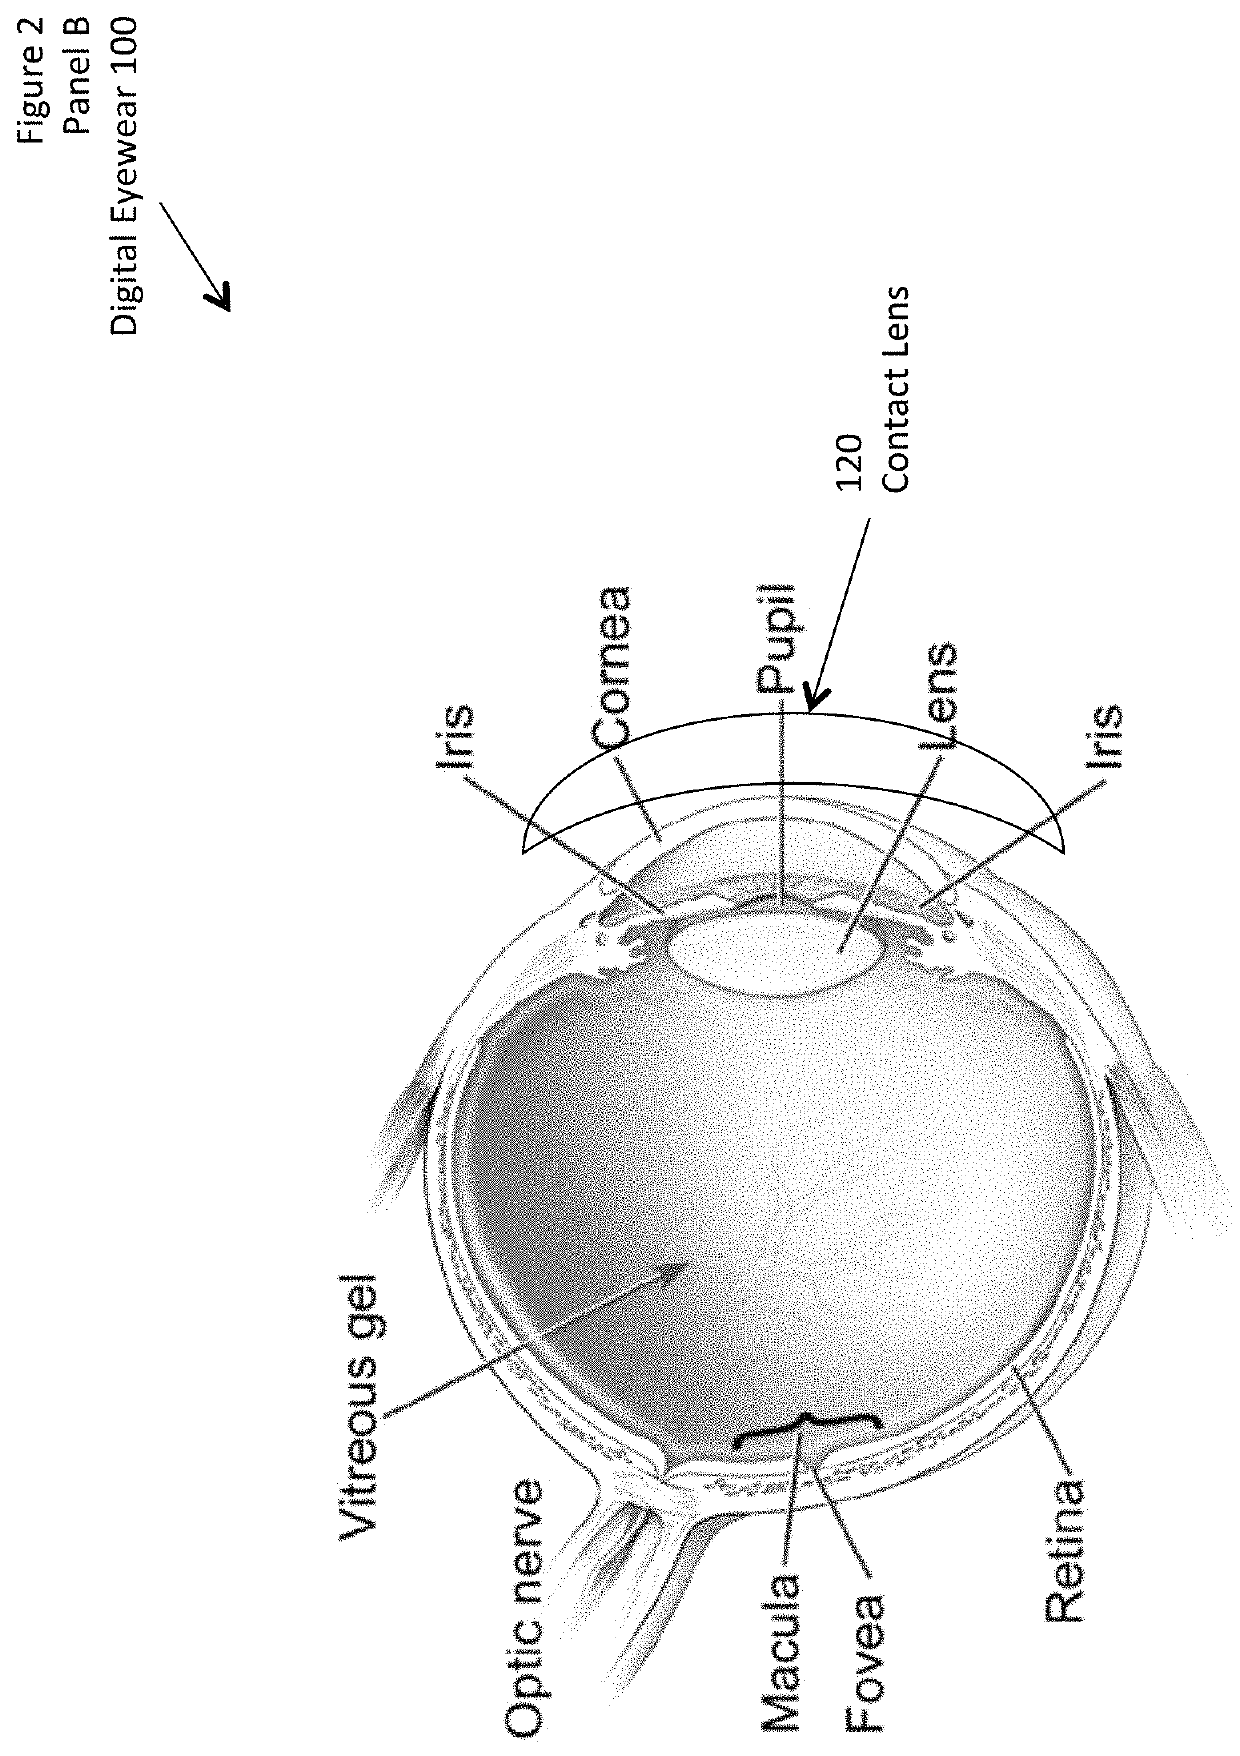 Digital eyewear system and method for the treatment and prevention of migraines and photophobia